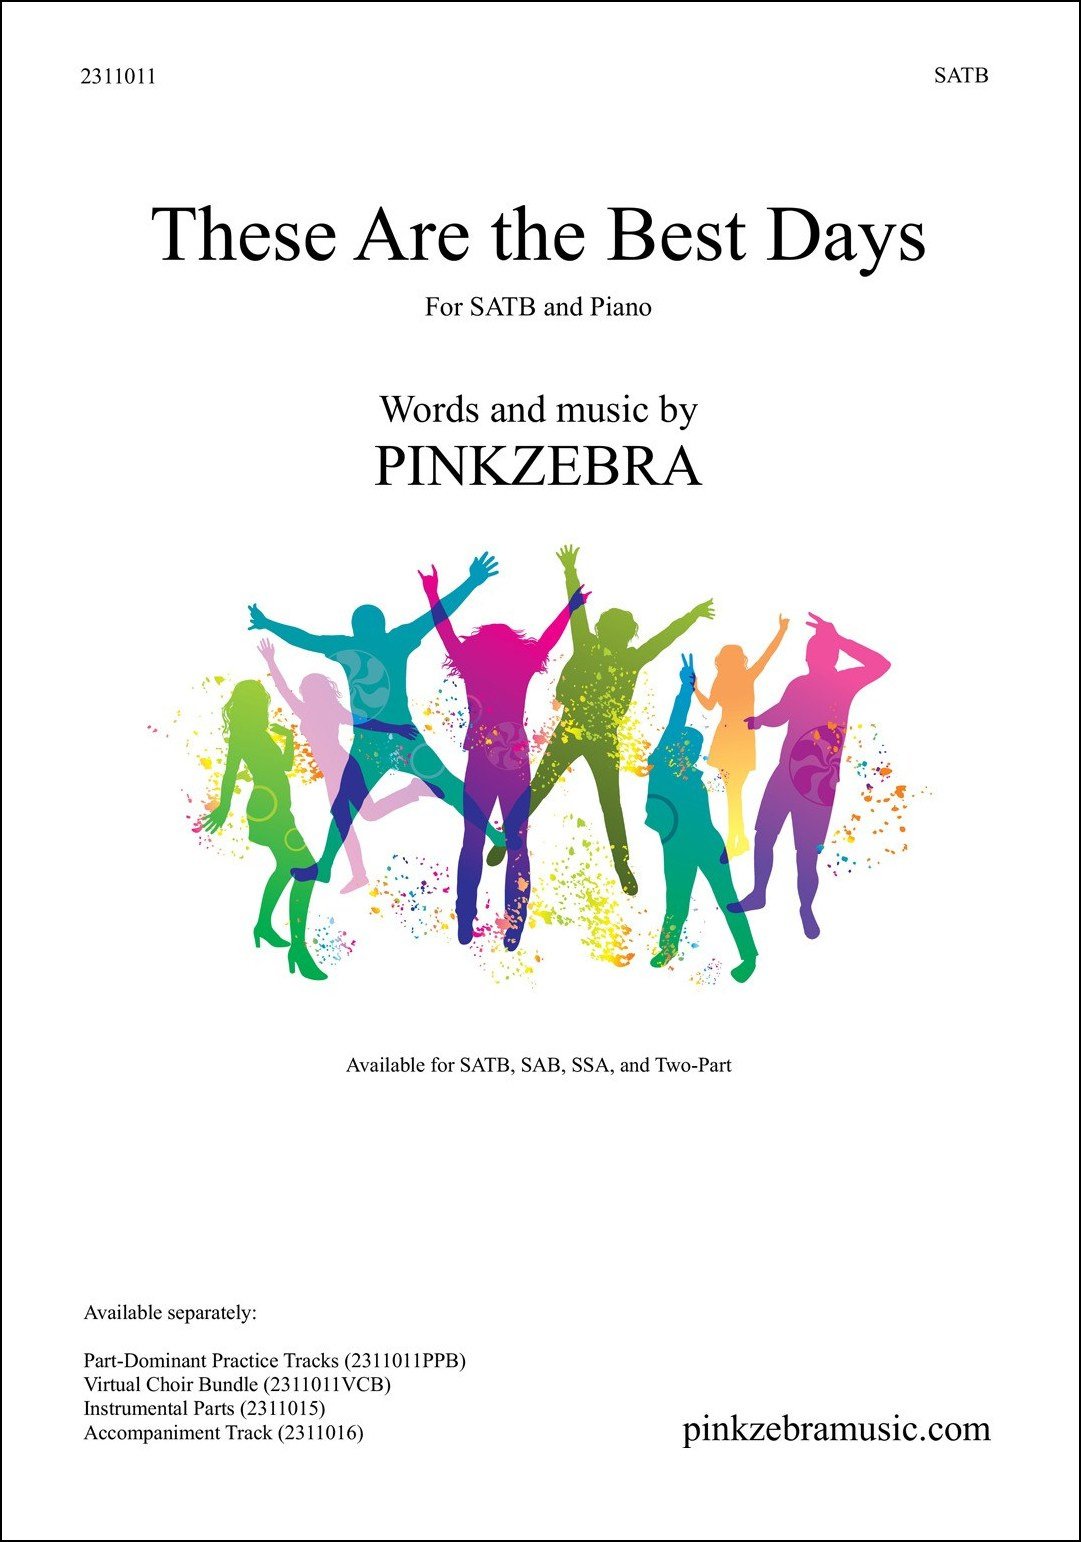 These Are the Best Days choral sheet music